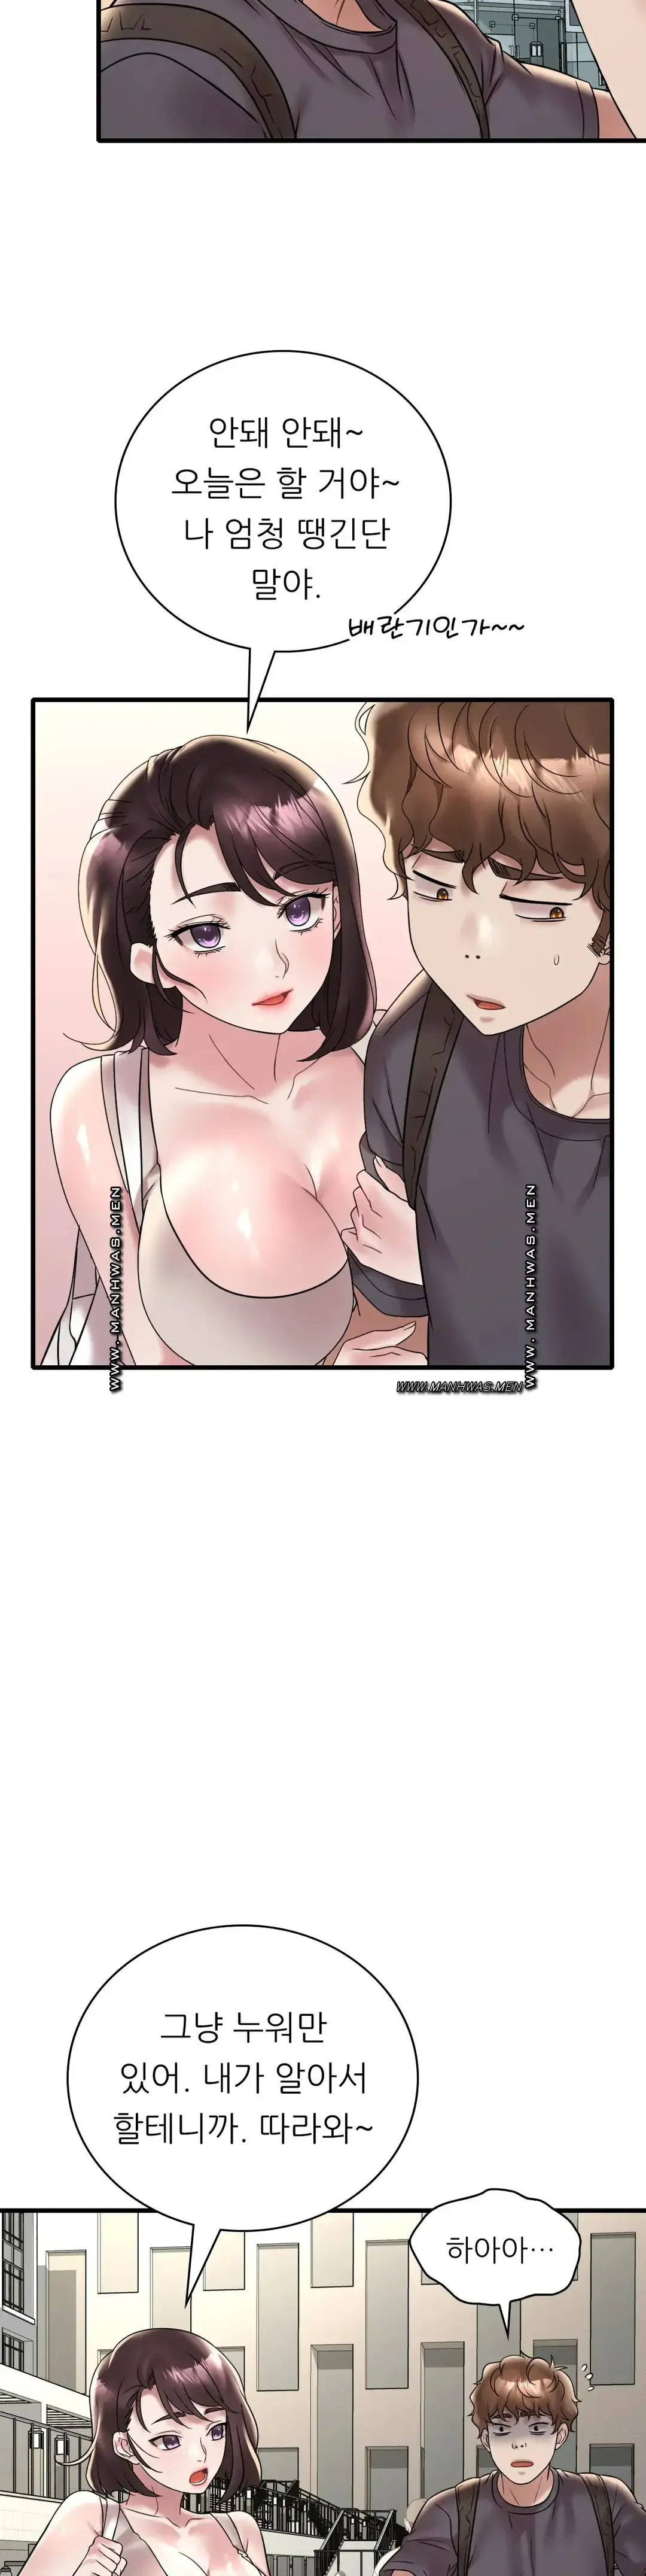 she-wants-to-get-drunk-raw-chap-31-27